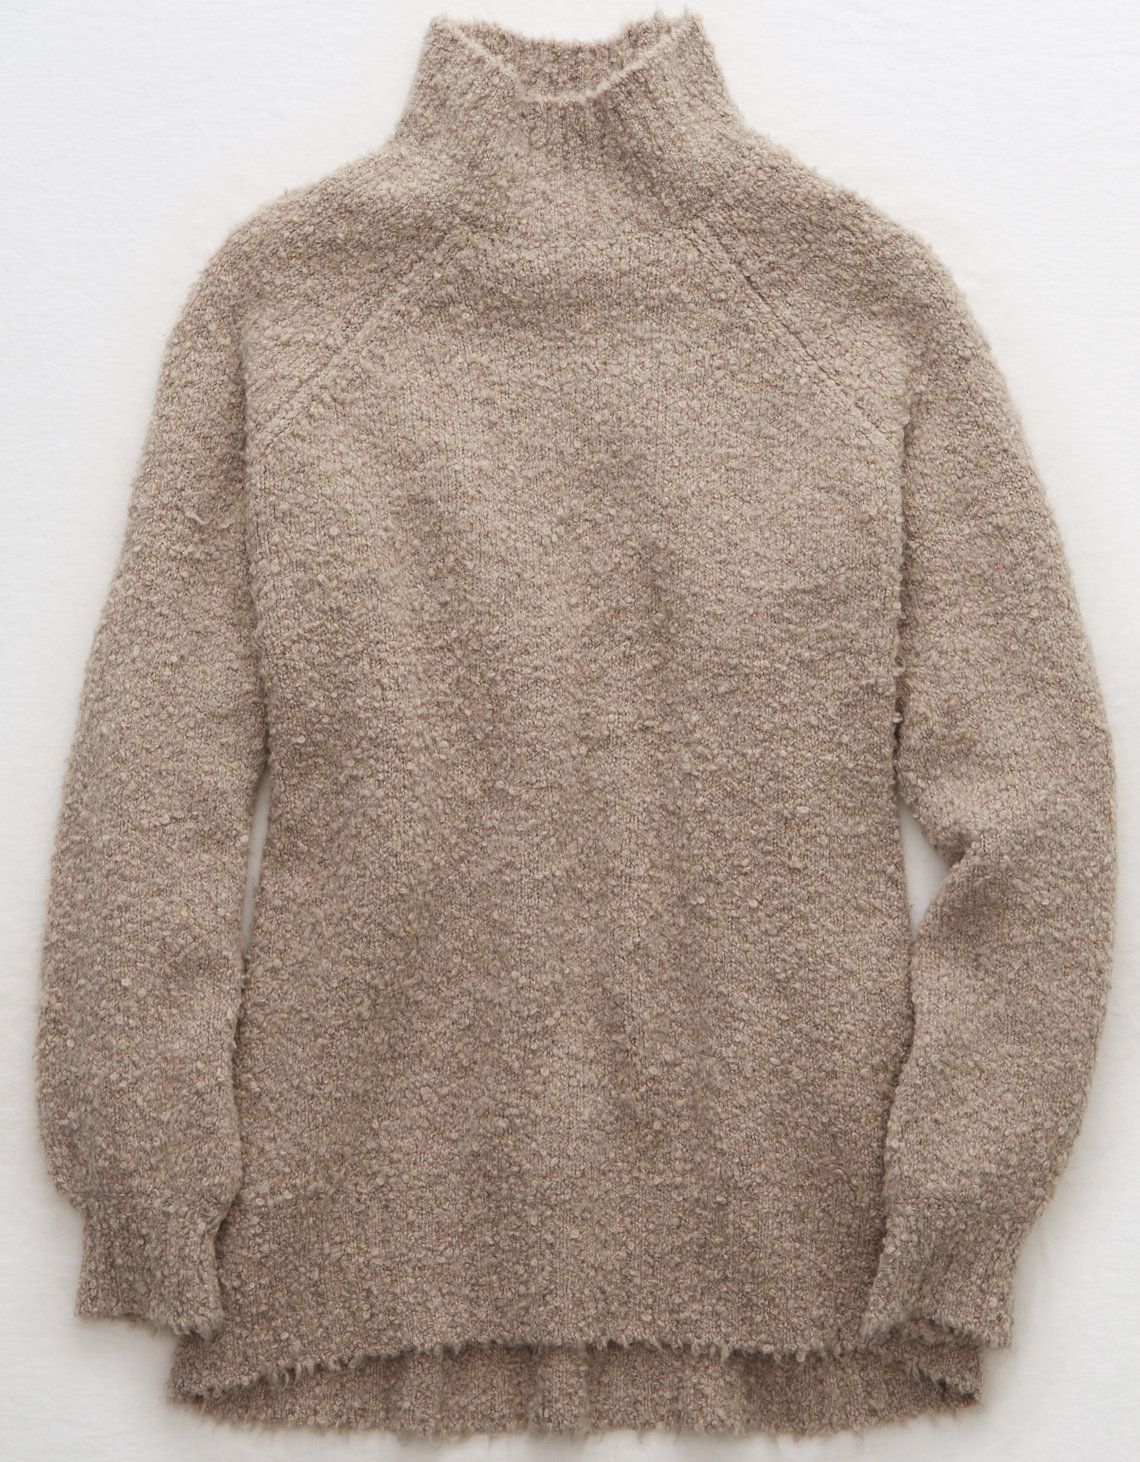 Aerie Boucle Oversized Sweater